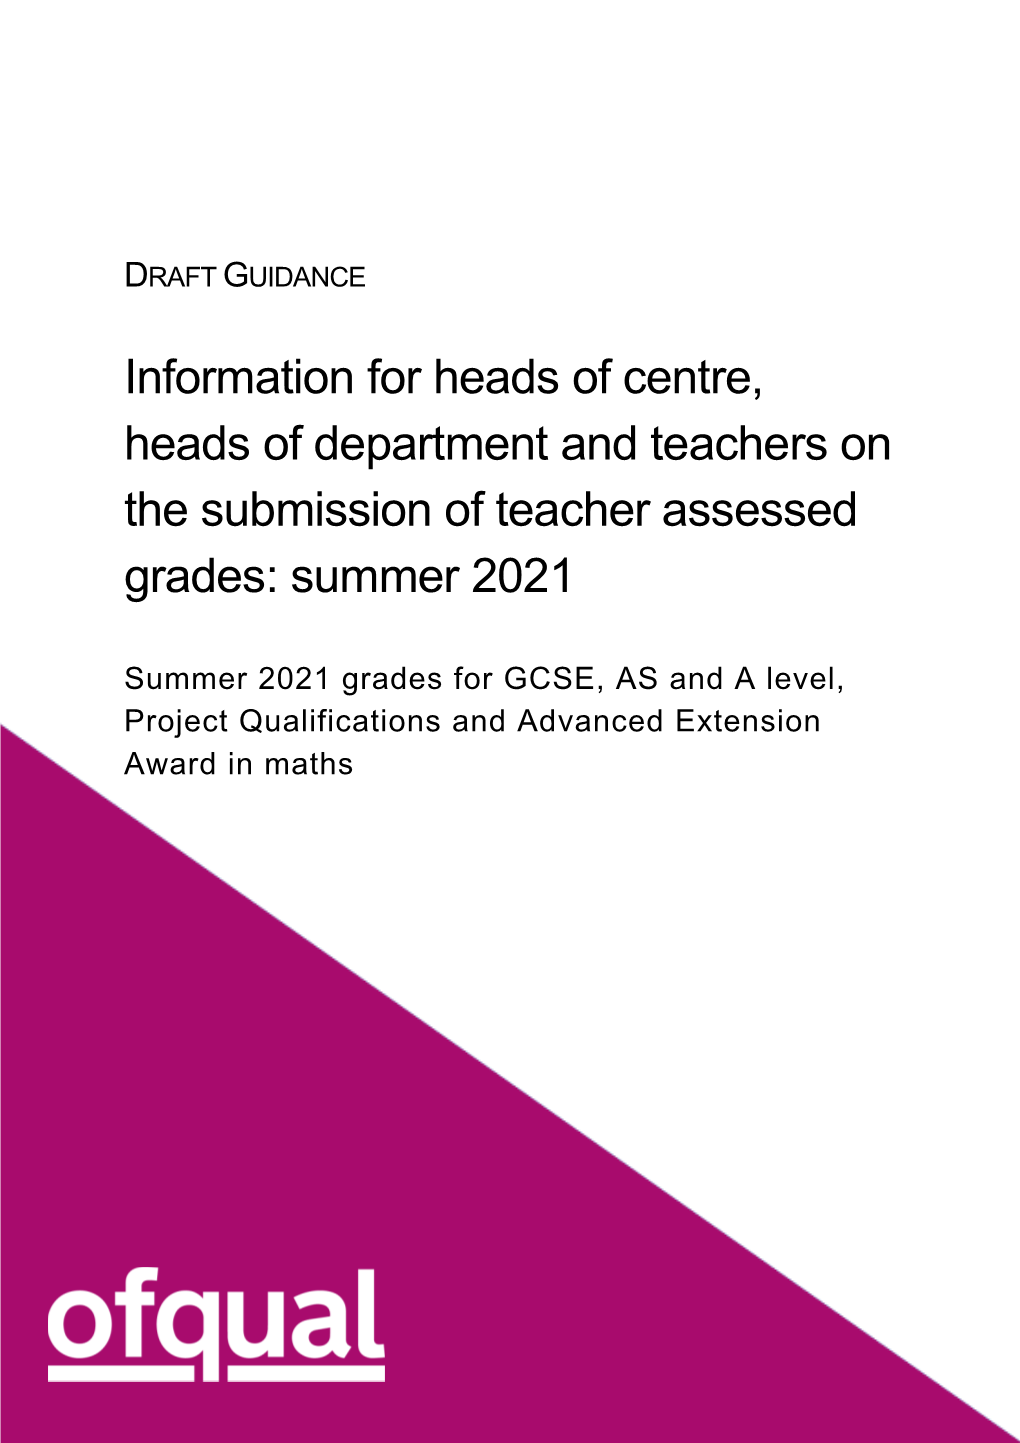 Information for Heads of Centre, Heads of Department and Teachers on the Submission of Teacher Assessed Grades: Summer 2021